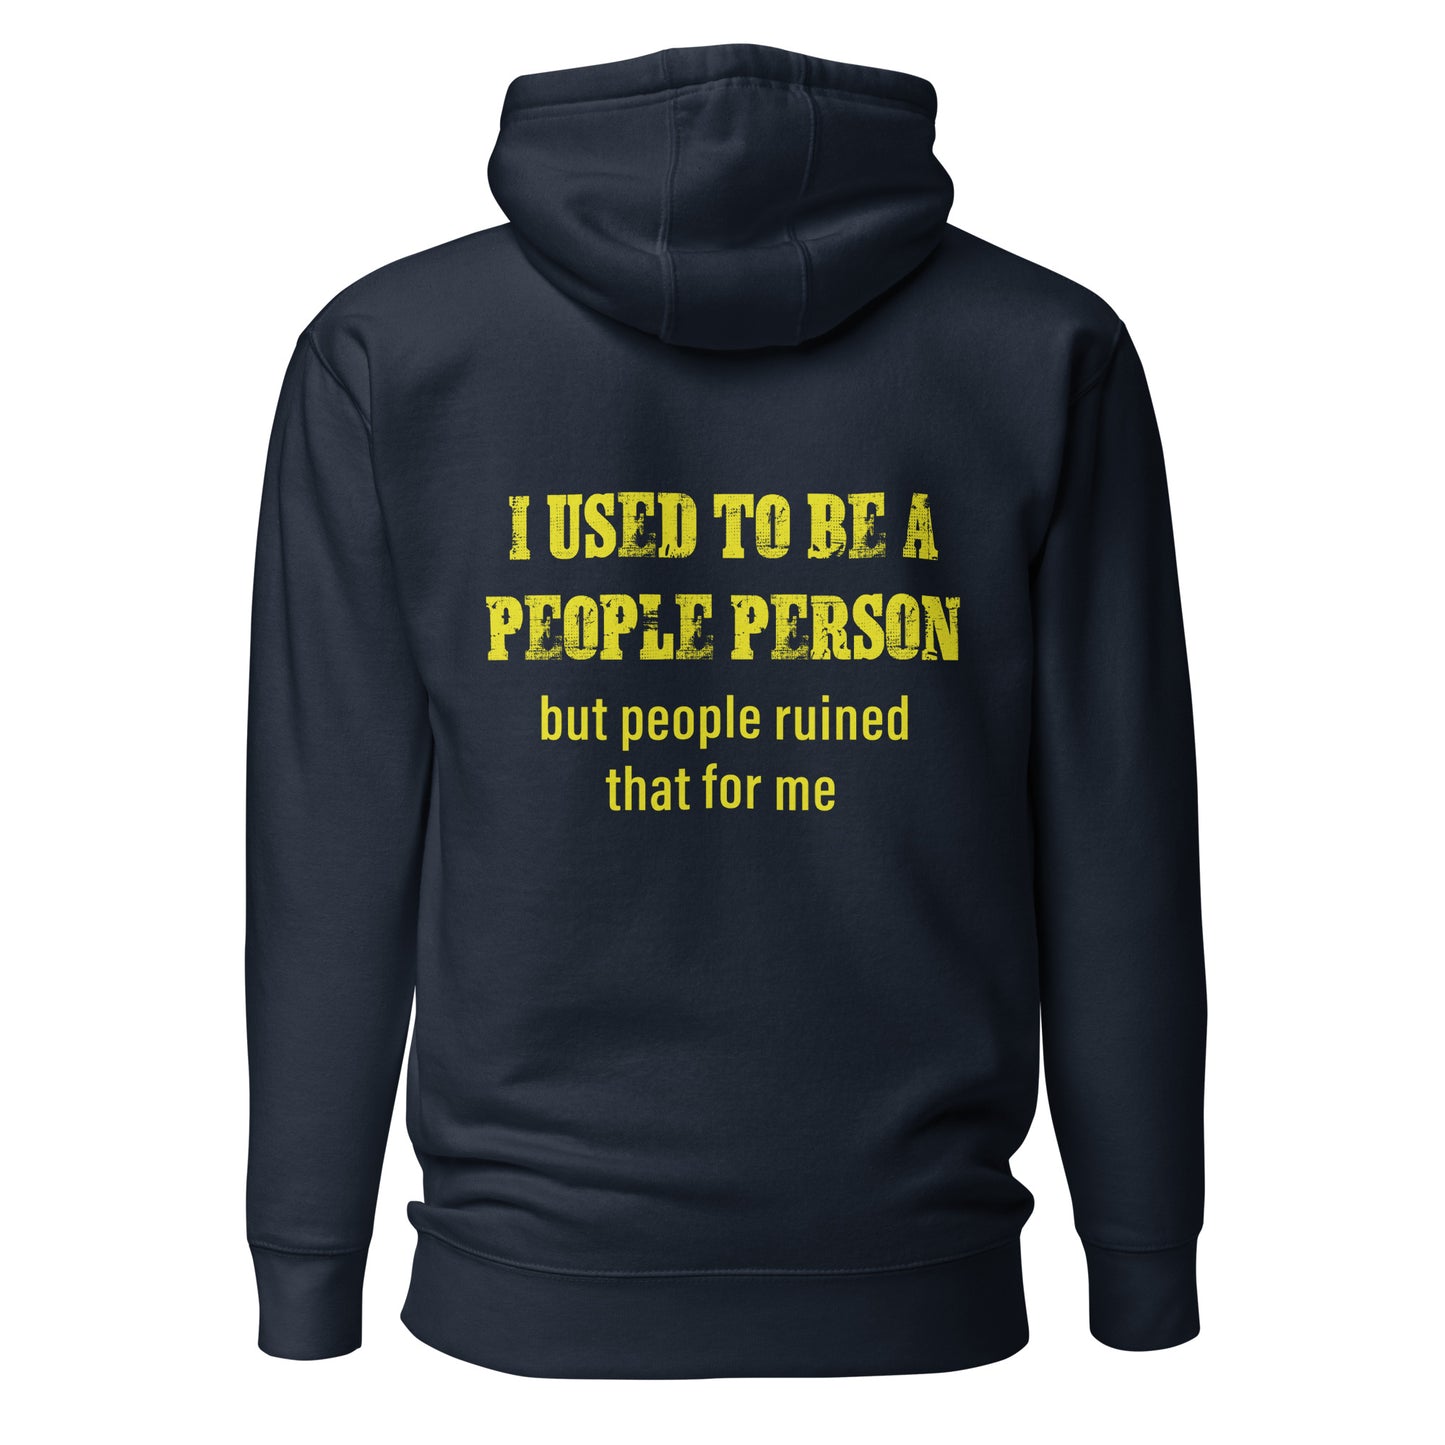 "Used To Be A People Person" Hoodie